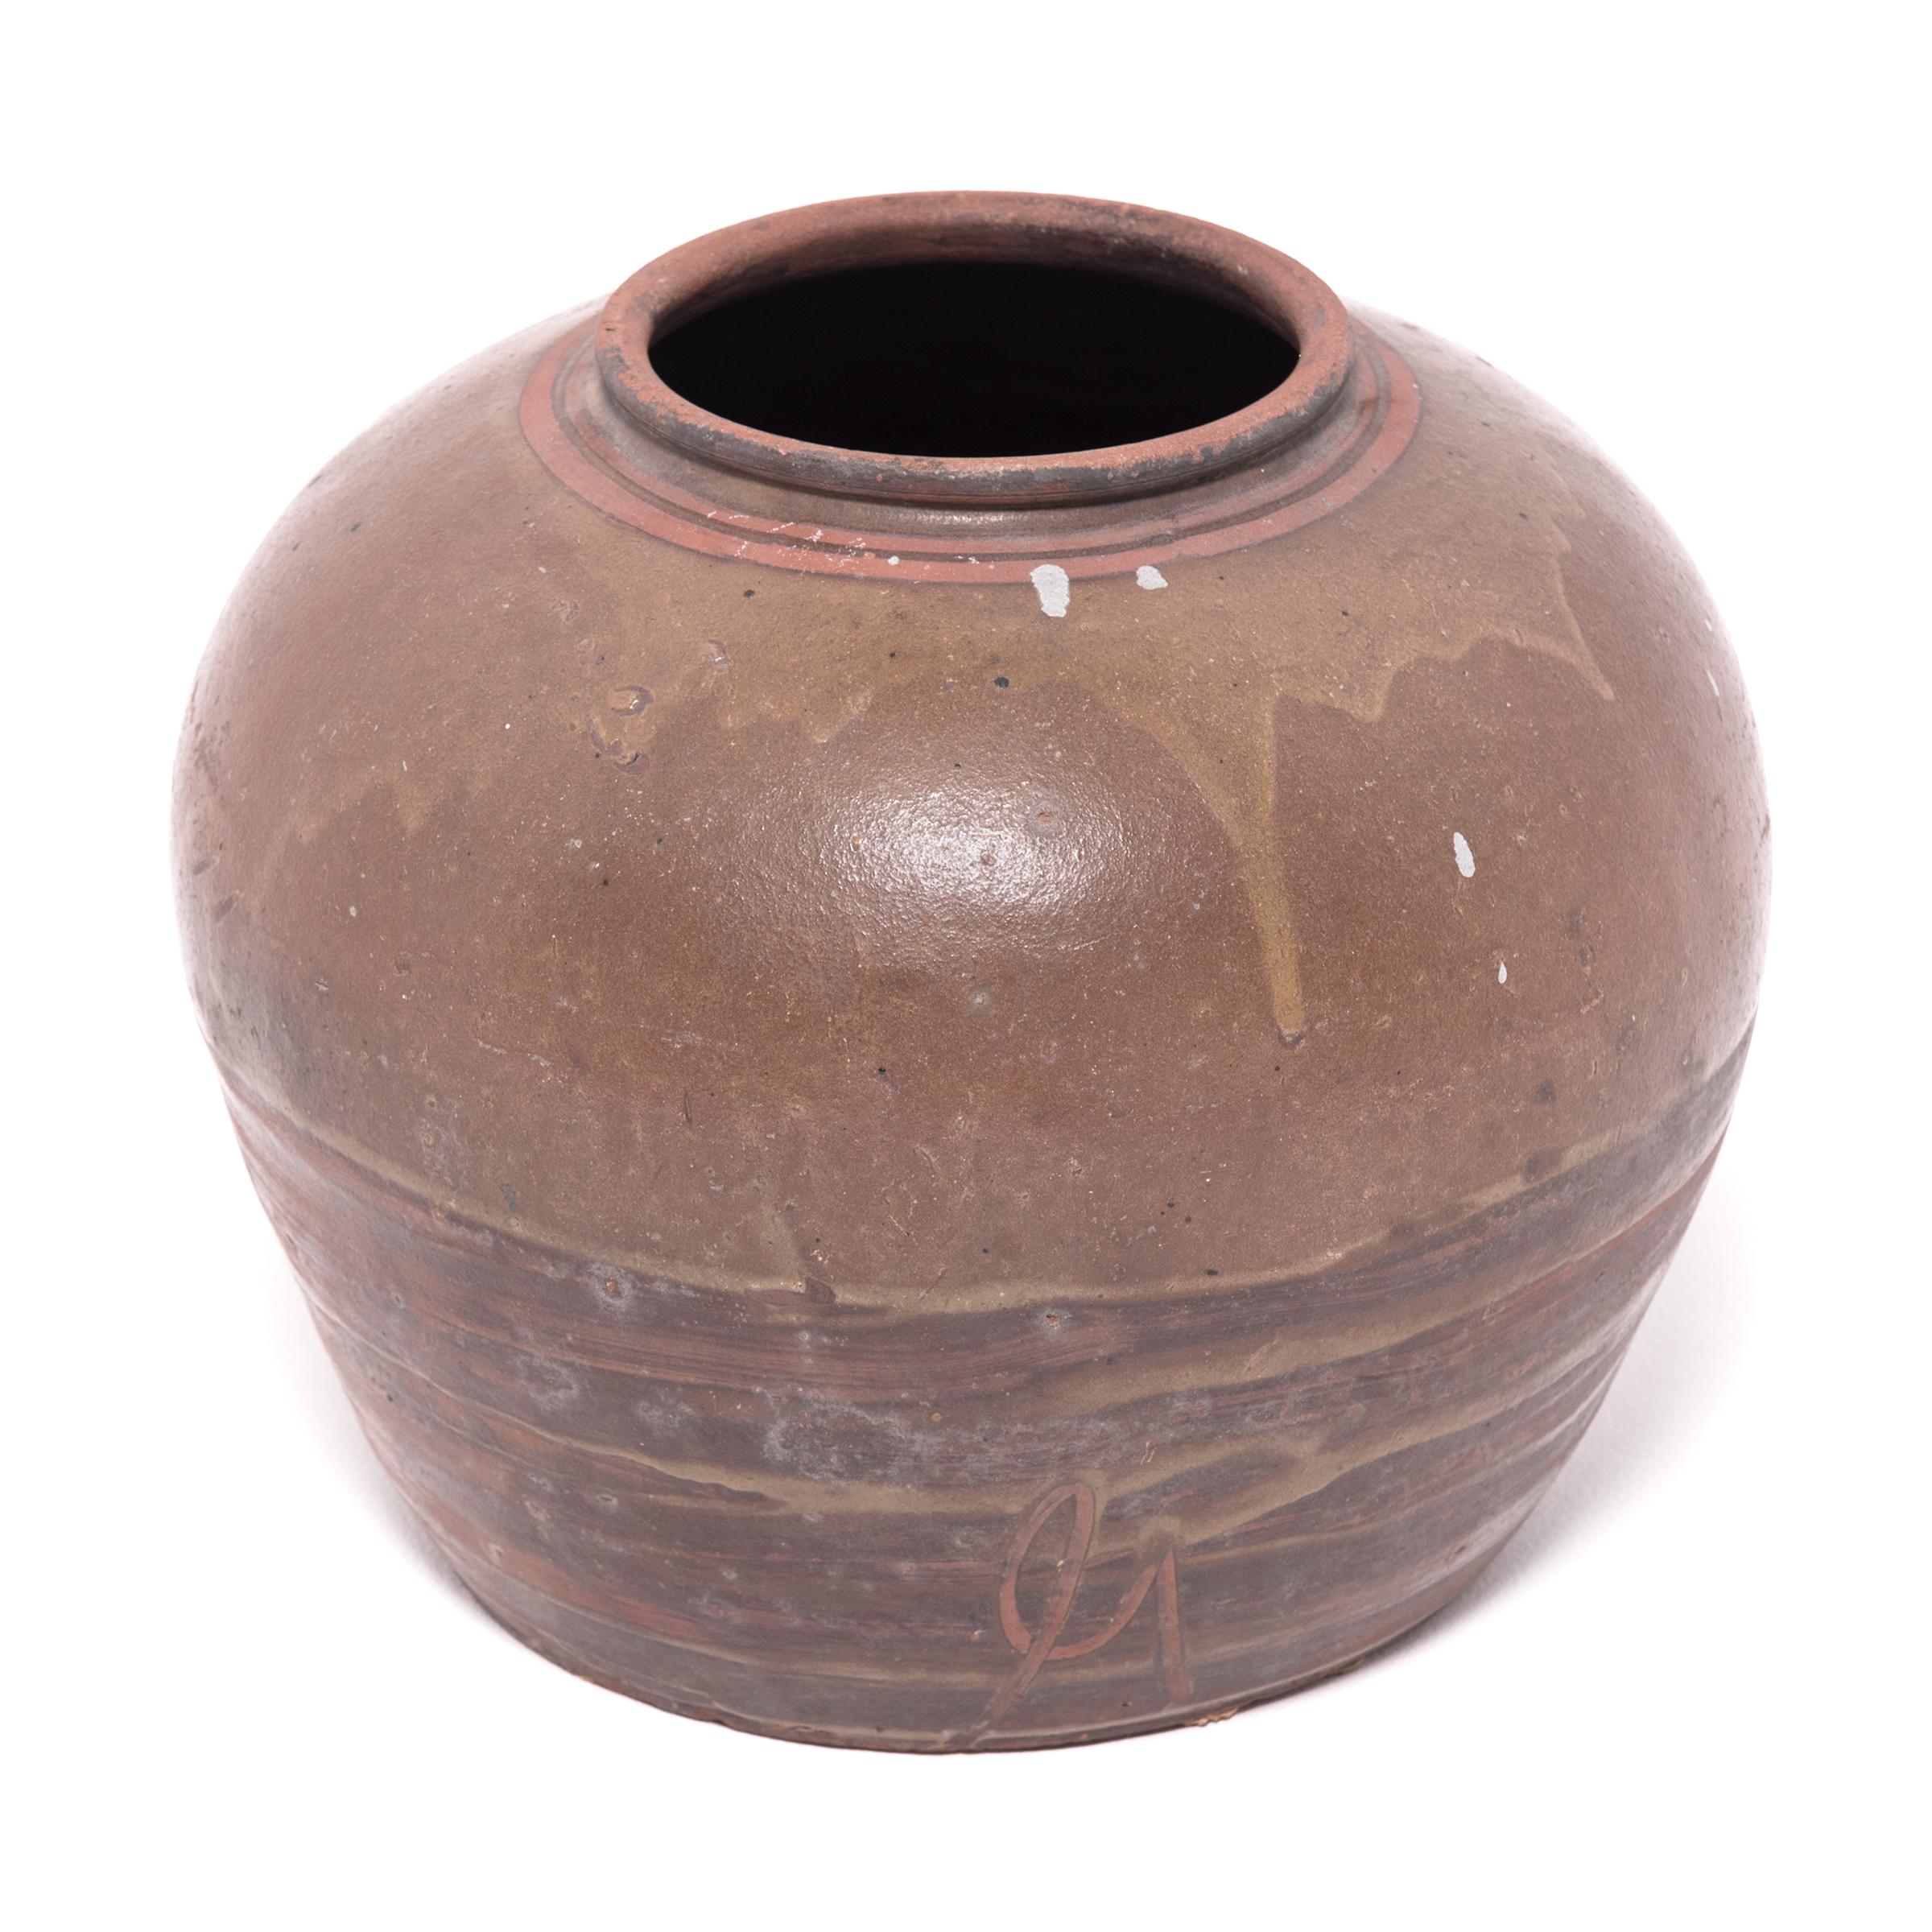 Tracing its roots back into the Han dynasty, this early 20th-century vessel emulates the full-bodied shapes and unusual glazing found in ancient ceramics. Marked with barren spots, a greenish brown glaze clings to the pot’s broad shoulders, dripping